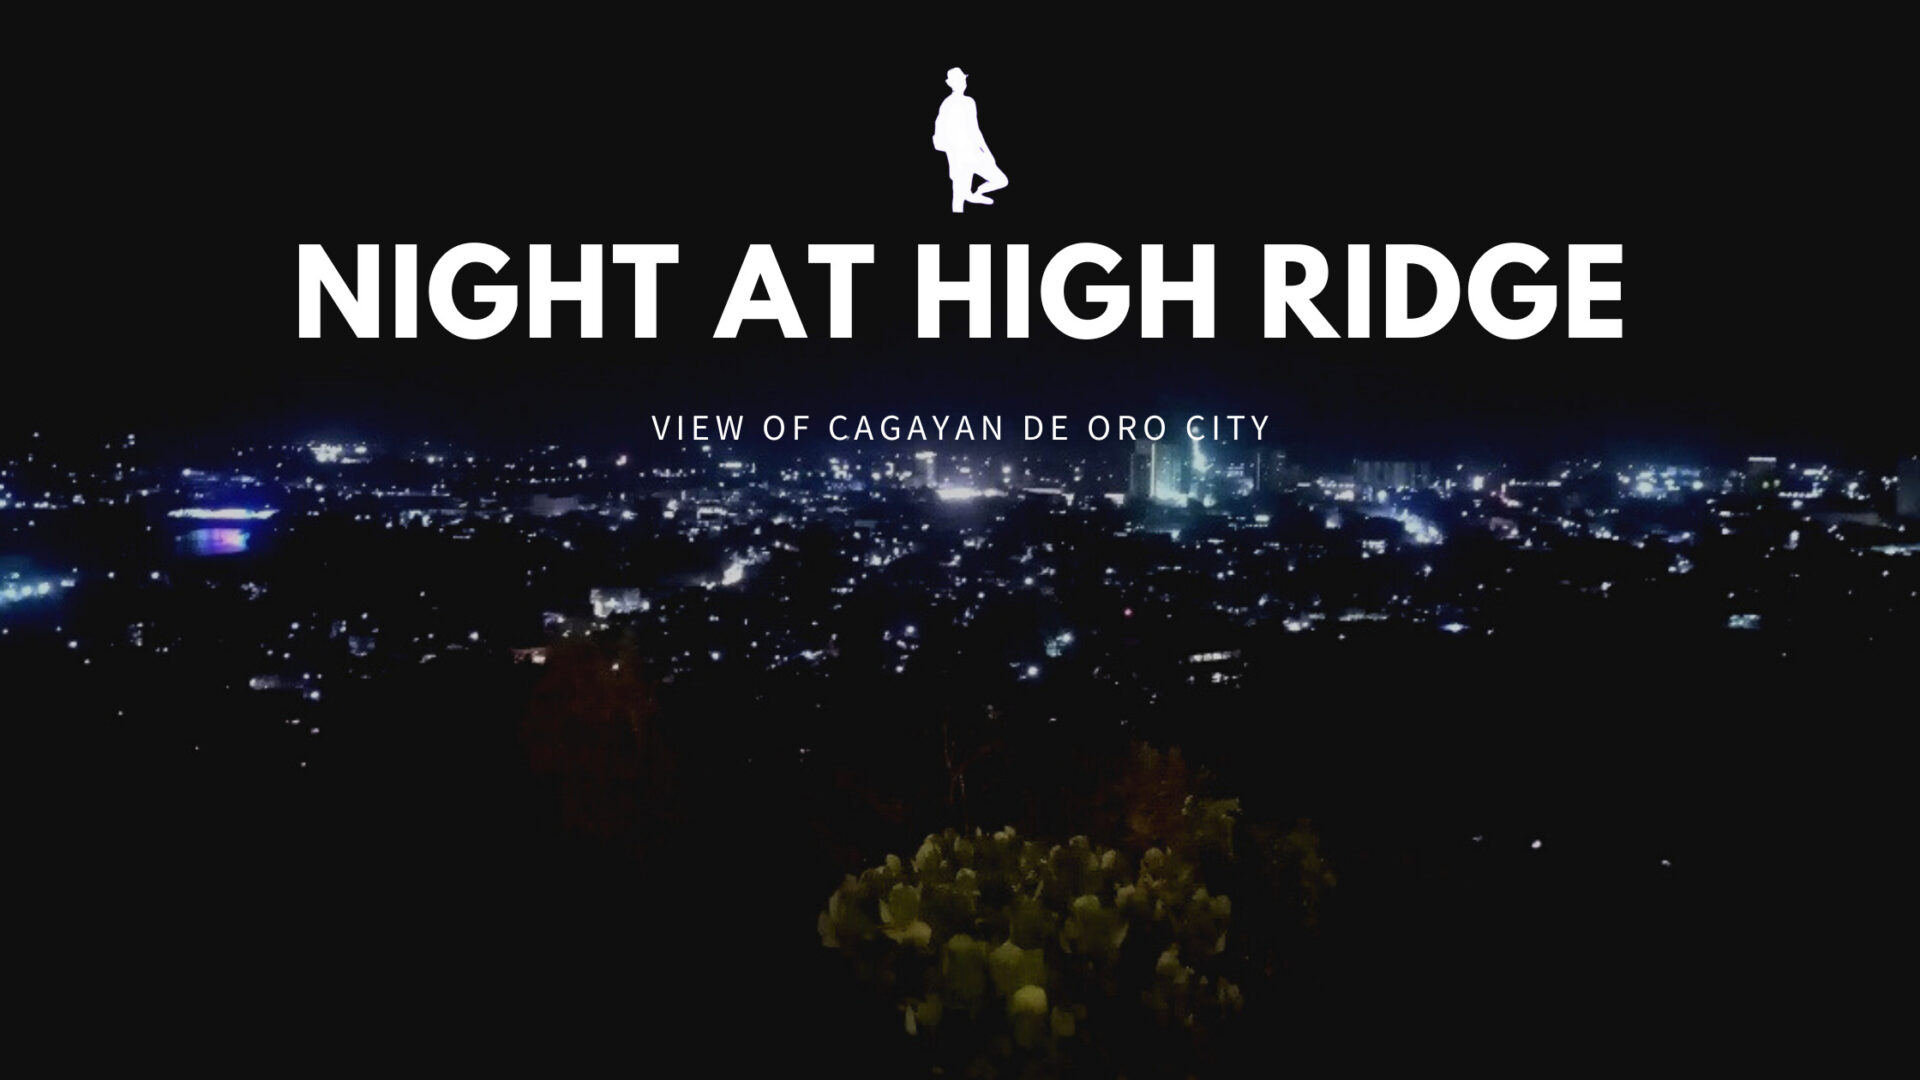 A View of Cagayan De Oro City at Night From High Ridge